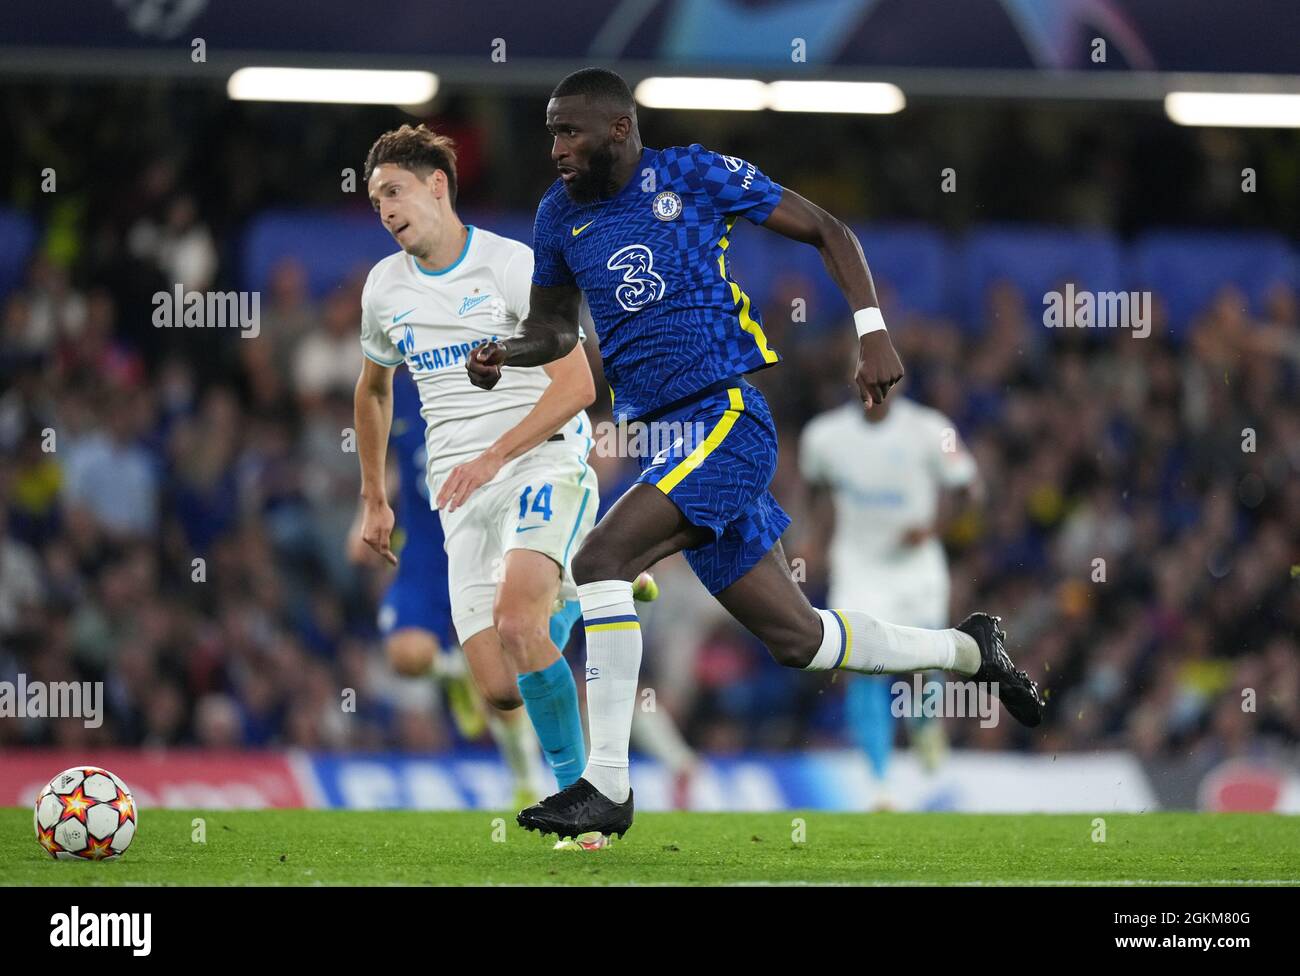 London, UK. 14th Sep, 2021. Antonio Rudiger of Chelsea moves from Daler Kuzyayev of Zenit St Petersburg during the UEFA Champions League group match between Chelsea and Zenit St. Petersburg at Stamford Bridge, London, England on 14 September 2021. Photo by Andy Rowland. Credit: PRiME Media Images/Alamy Live News Stock Photo